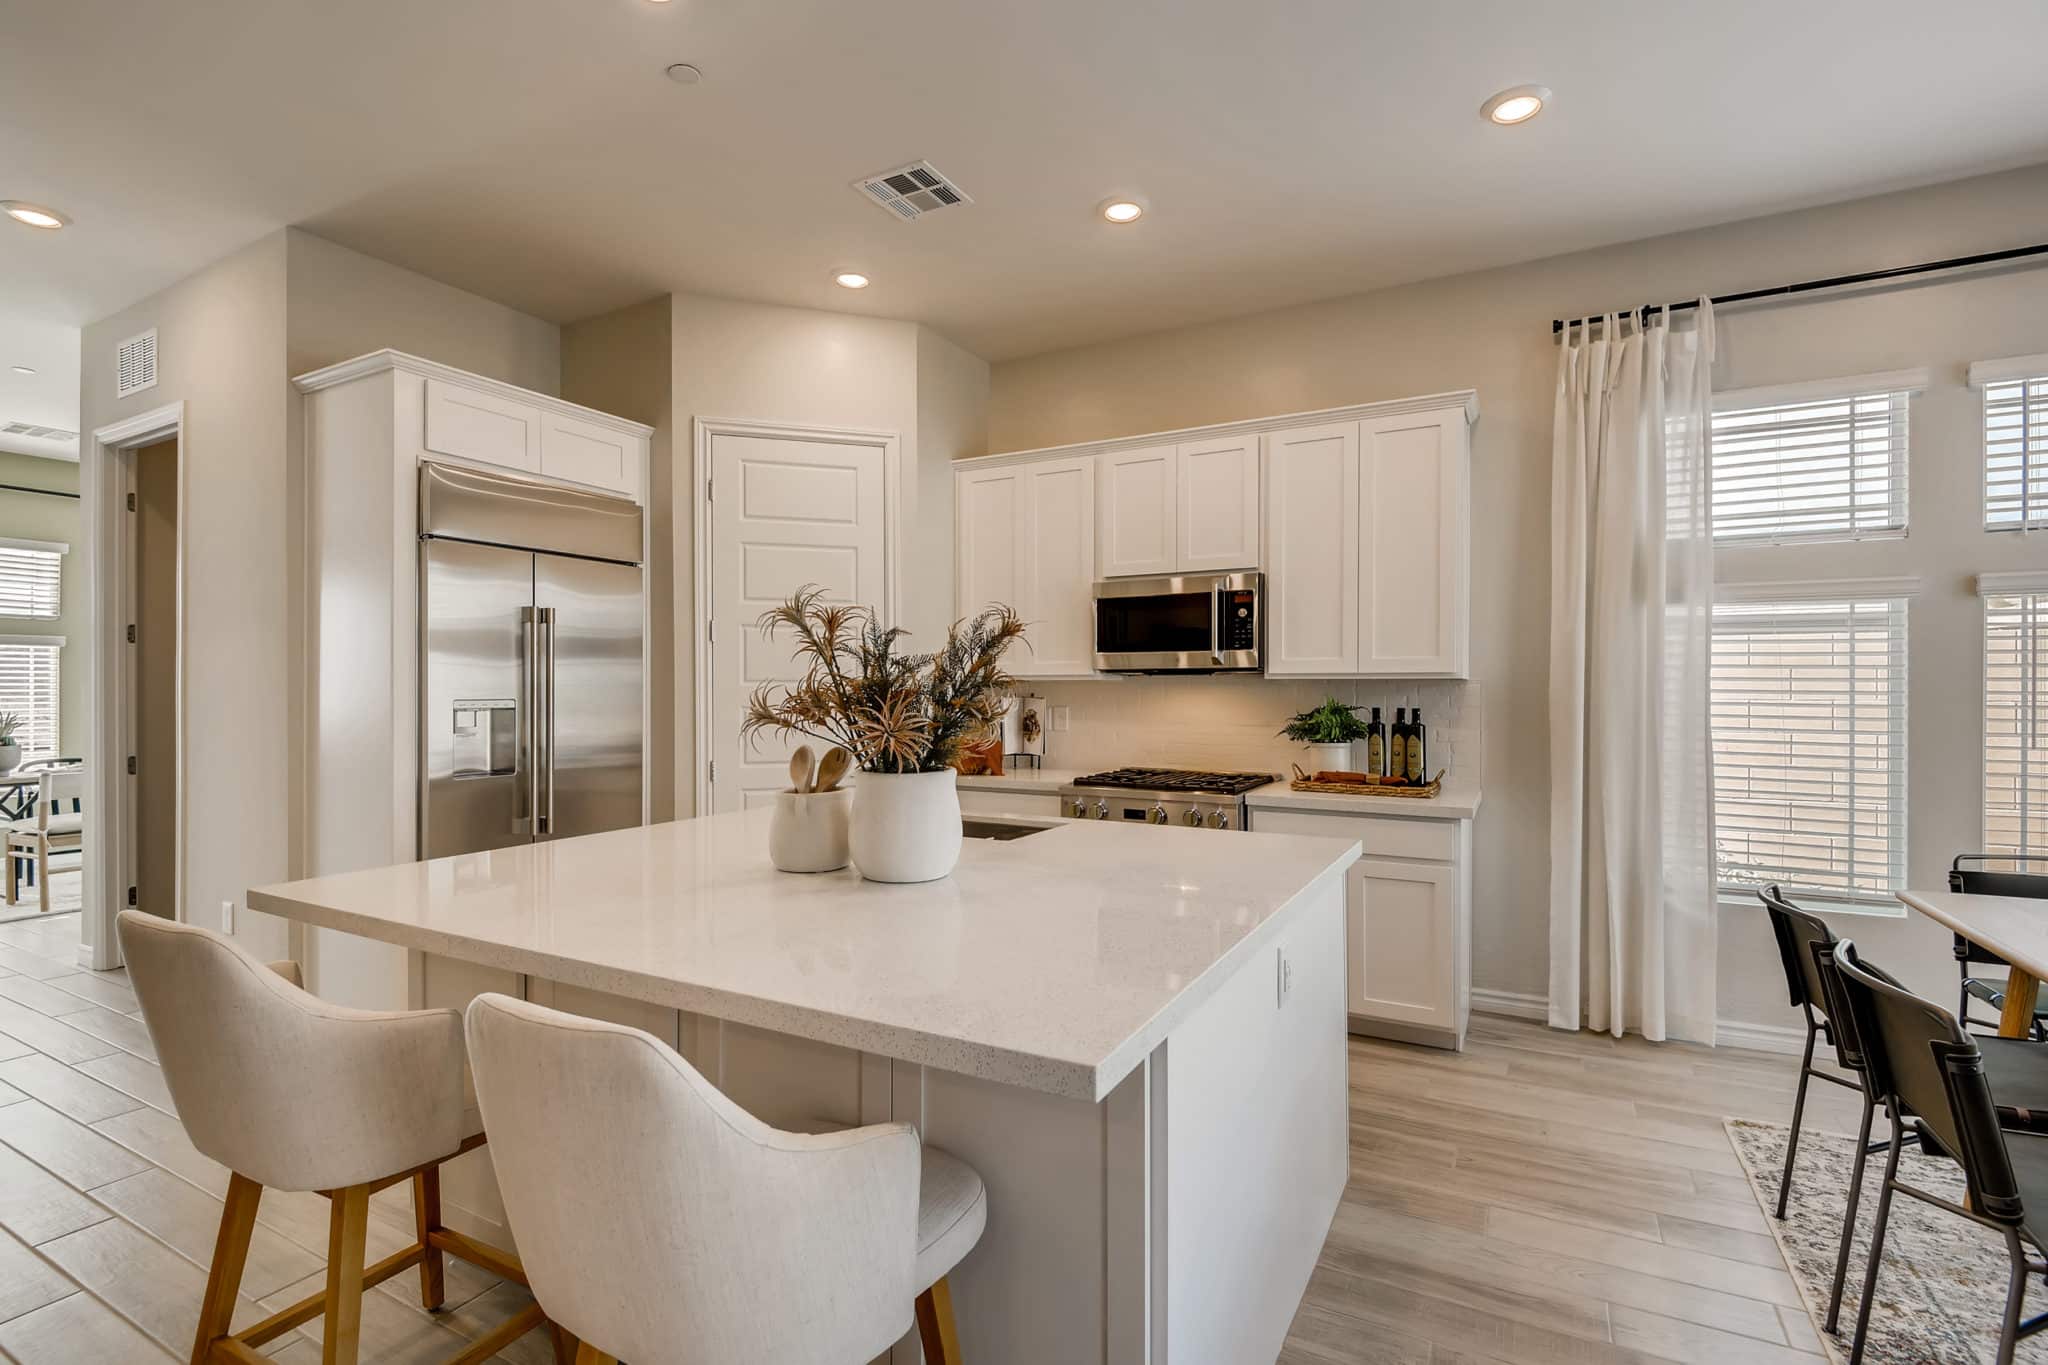 Kitchen of Connery model at Heritage by Lennar